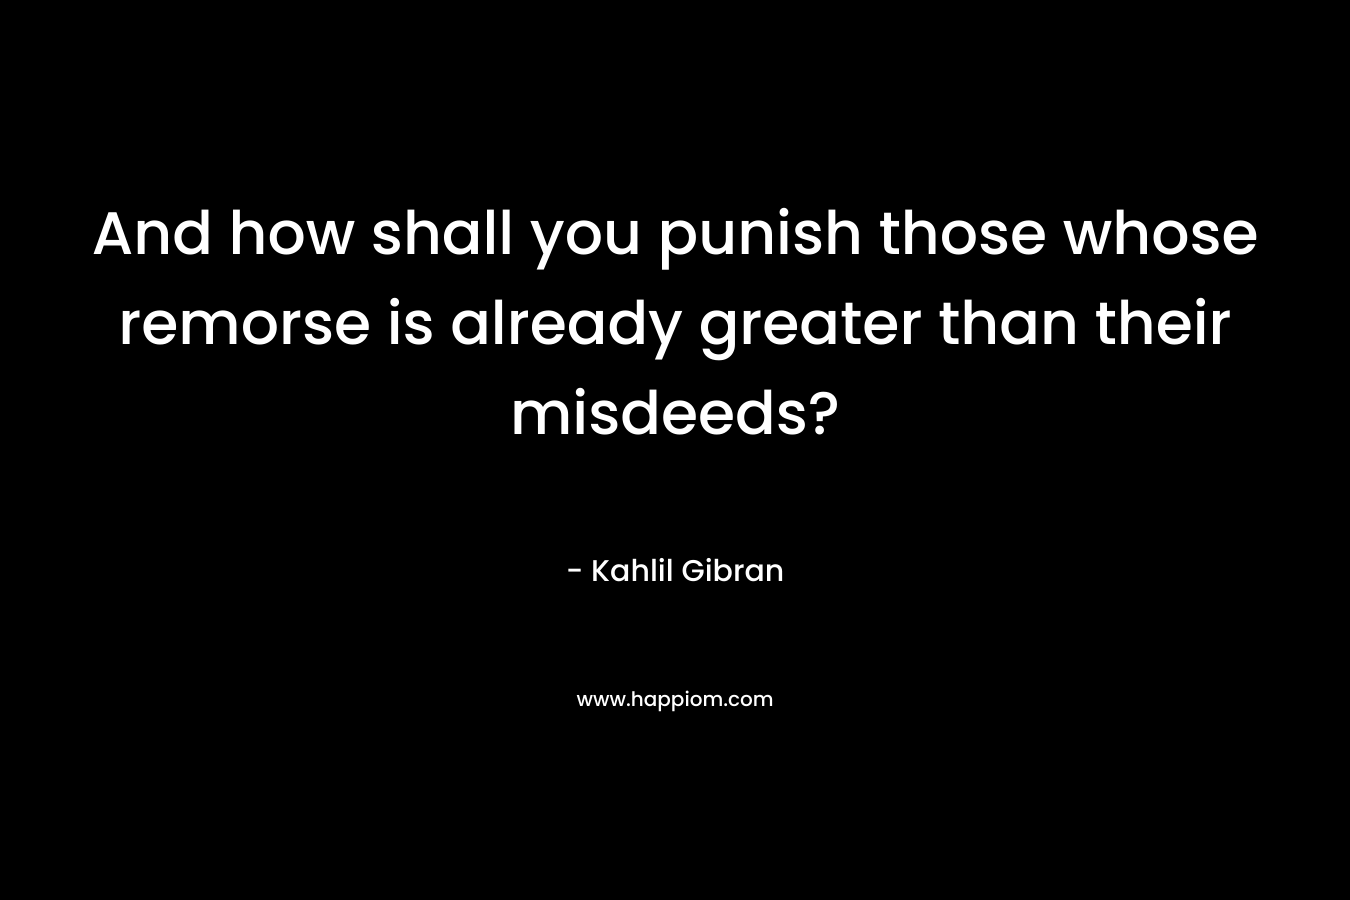 And how shall you punish those whose remorse is already greater than their misdeeds? – Kahlil Gibran